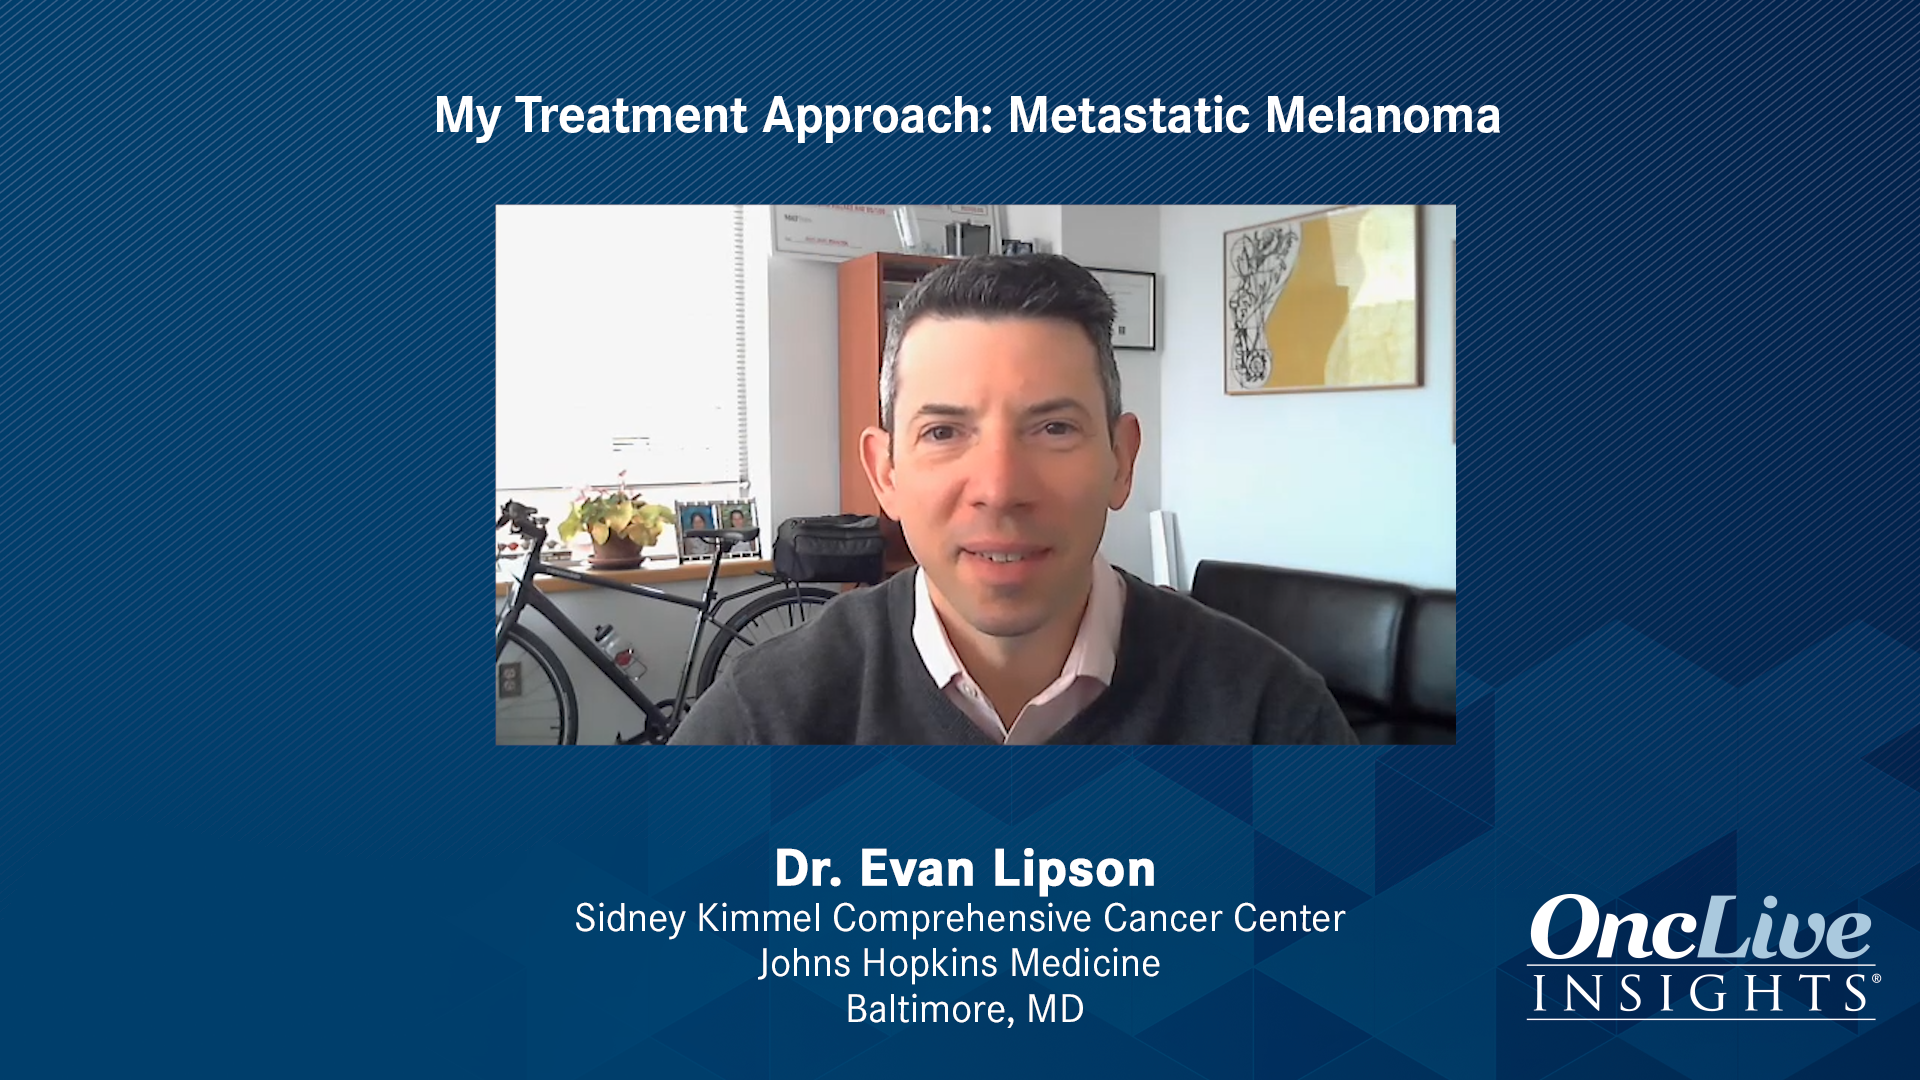 Closing Remarks on the Treatment of Patients With Metastatic Melanoma